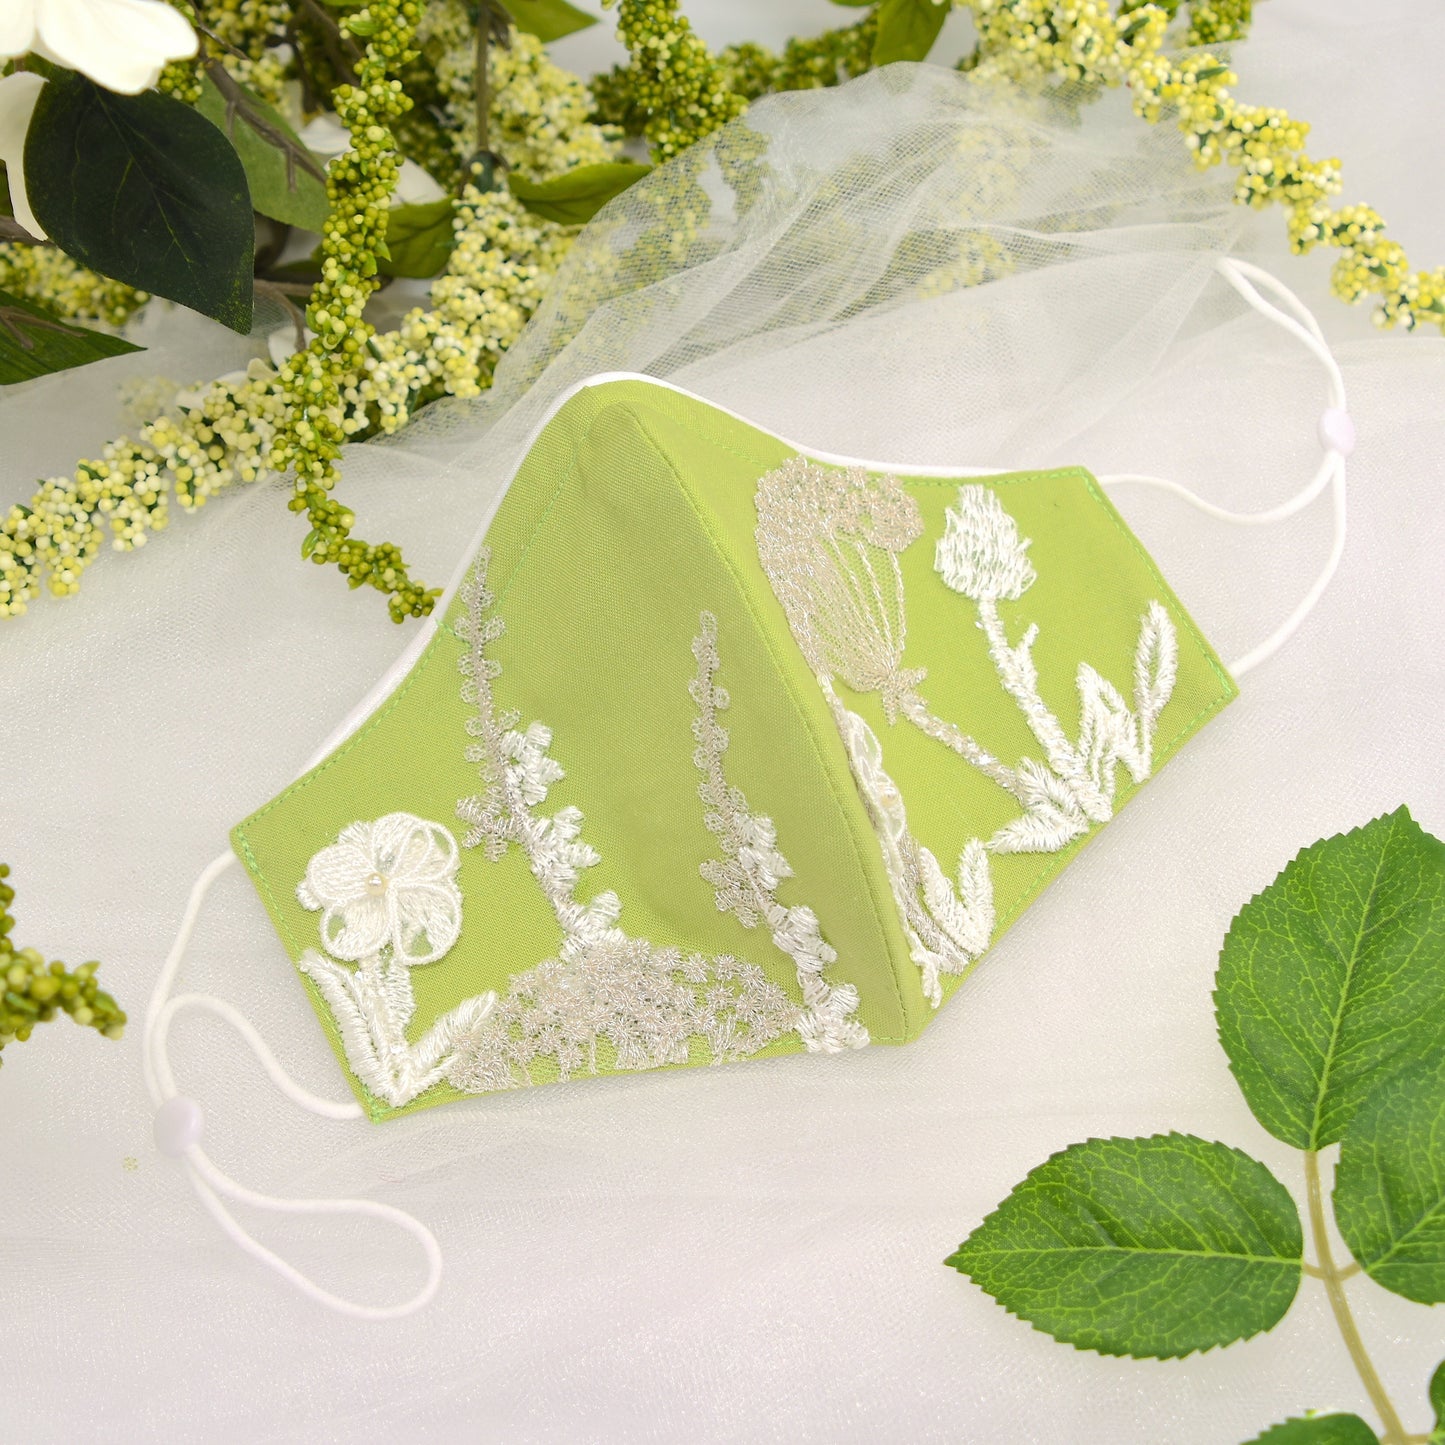 Pastel Green Bridesmaid Face Mask with Embroidery Appliqué and White Satin Piping